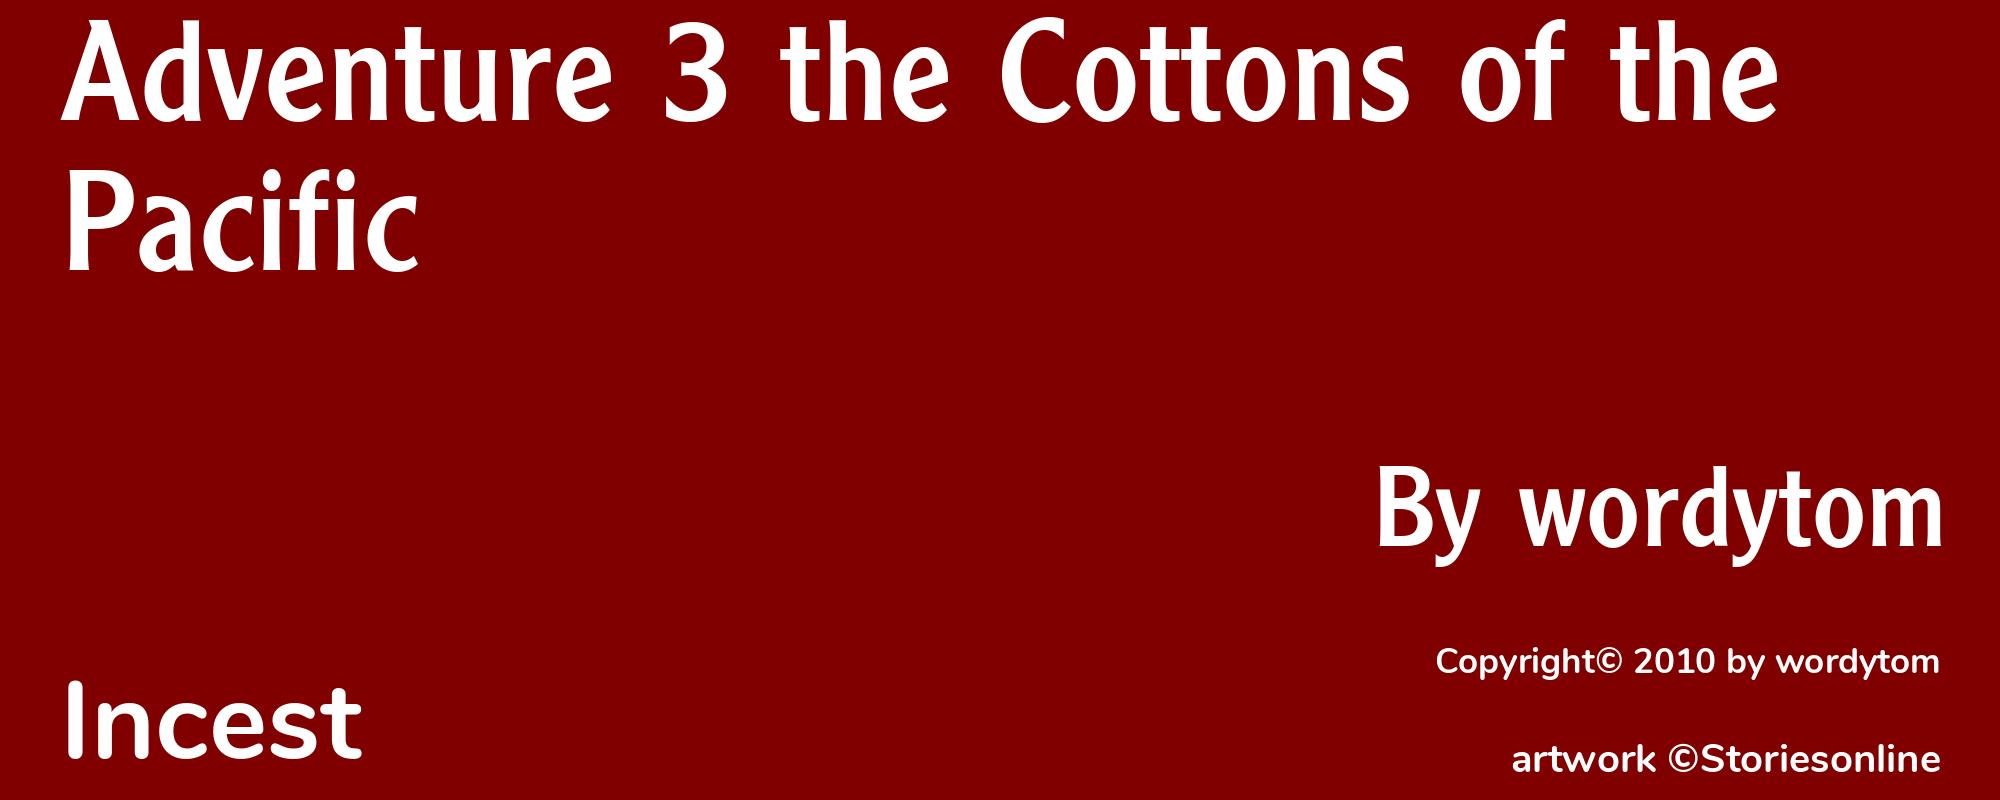 Adventure 3 the Cottons of the Pacific - Cover